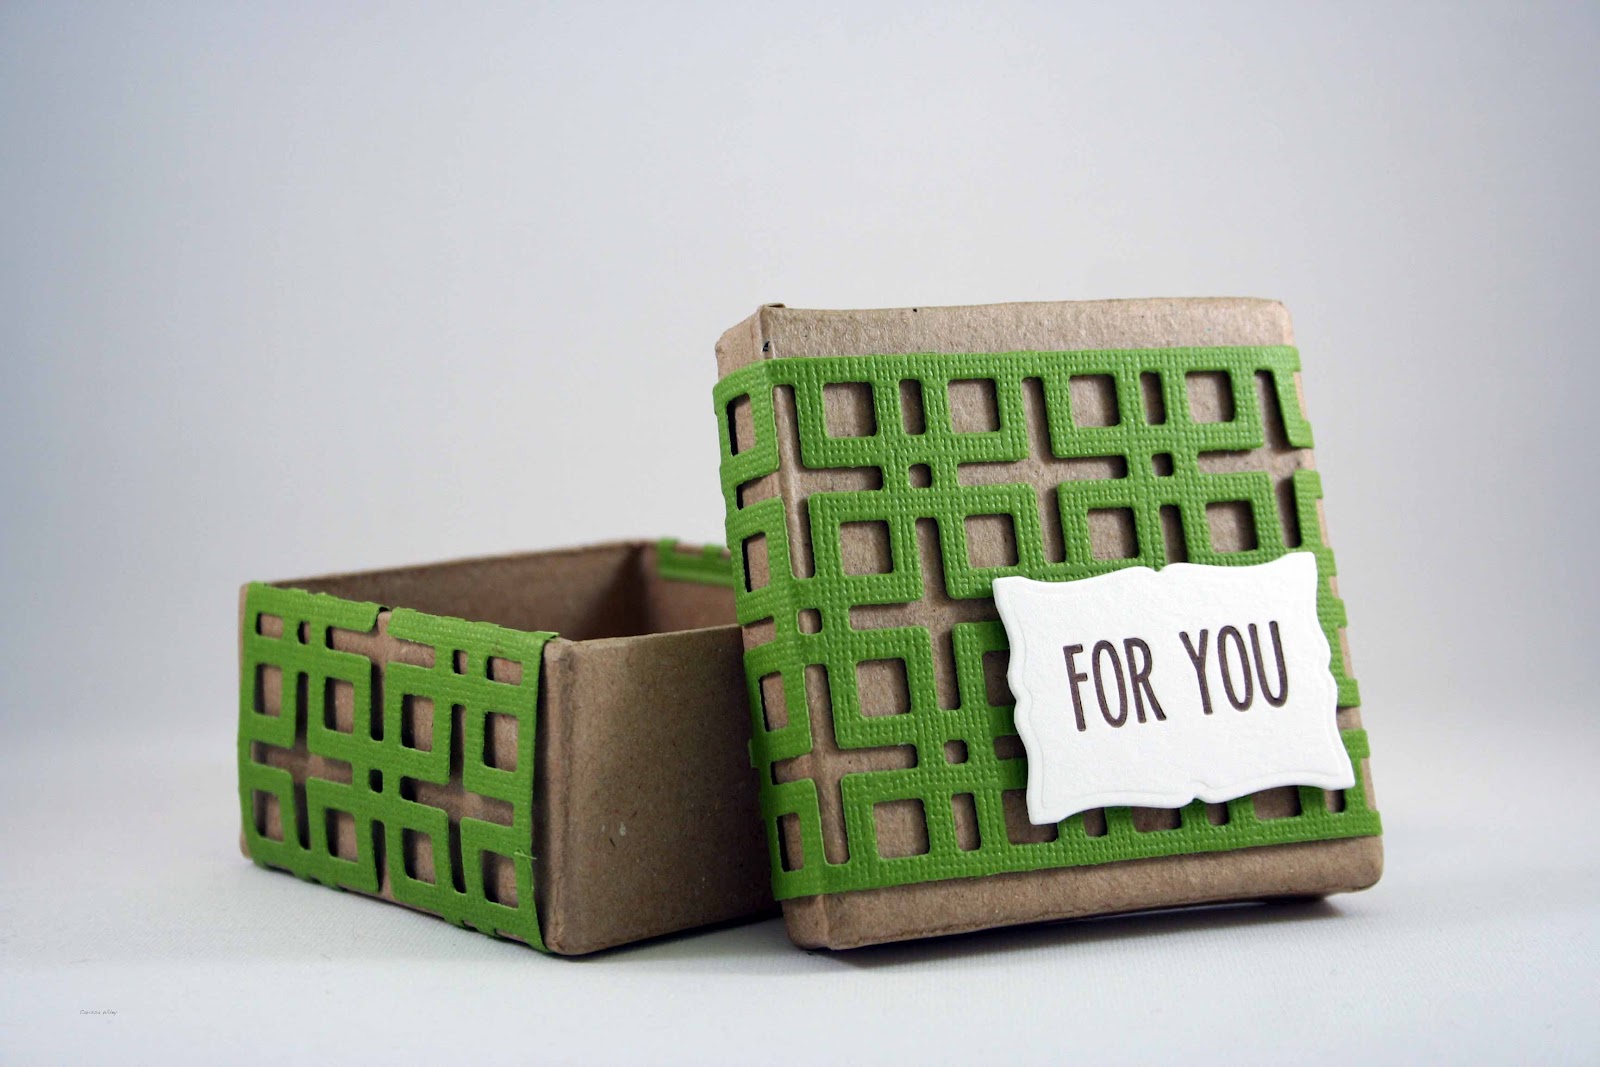  For you gift box featuring the  Lattice Die  